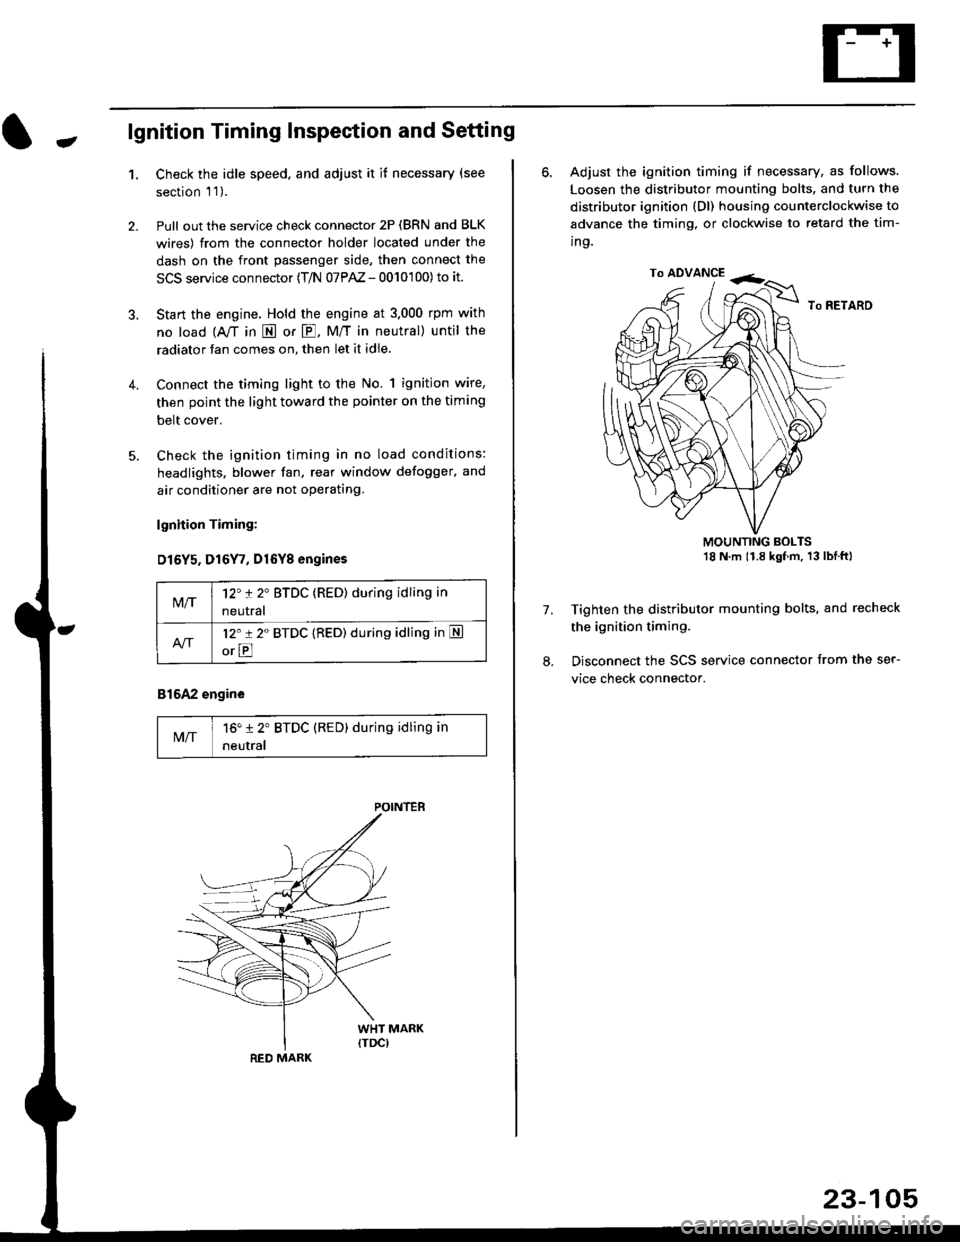 HONDA CIVIC 1997 6.G Workshop Manual -lgnition Timing Inspection and Setting
1.Check the idle speed, and adjust it it necessary (see
section l 1 ).
Pull out the service check connector 2P (BRN and BLK
wires) from the connector holder l